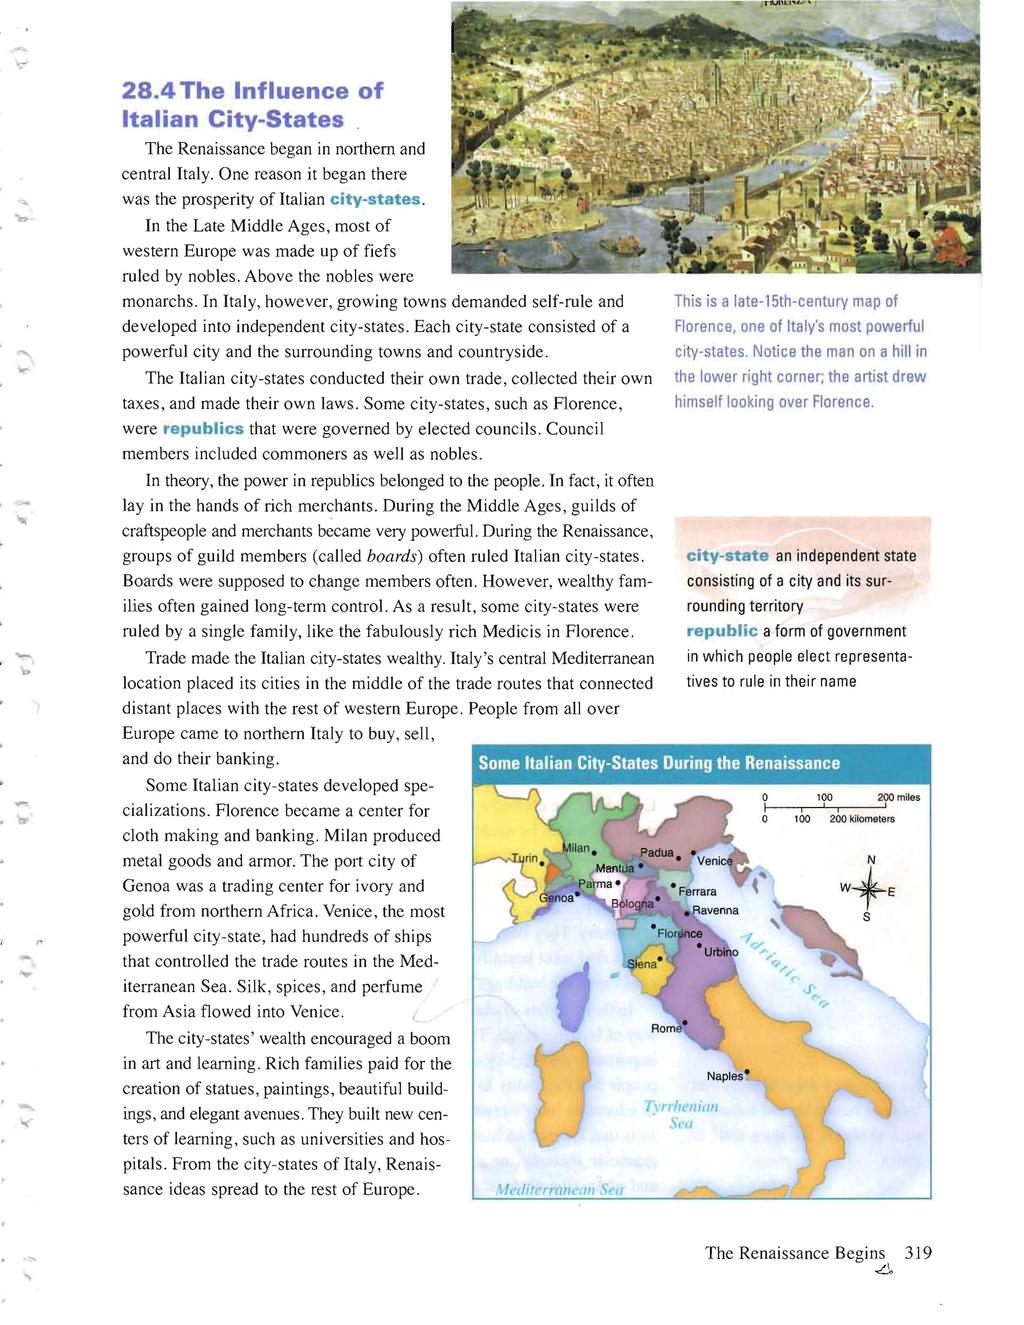 28.4 The Influence of Italian City ~ States The Renaissance began in northern and central Italy. One reason it began there was the prosperity of Italian city-states.